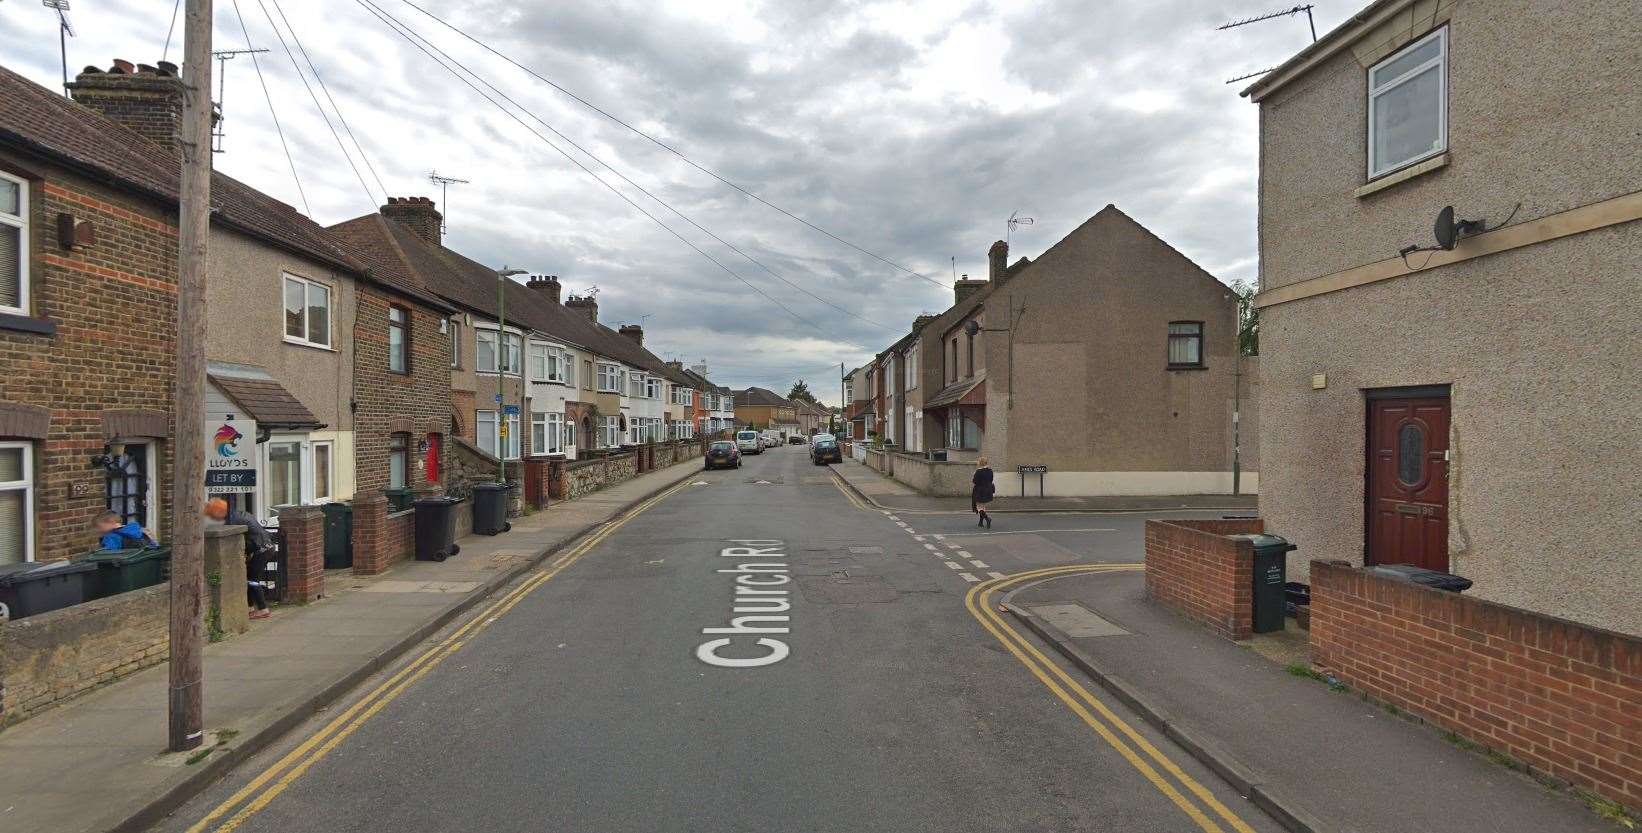 A boy has been hit by car in Church Road, Swanscombe